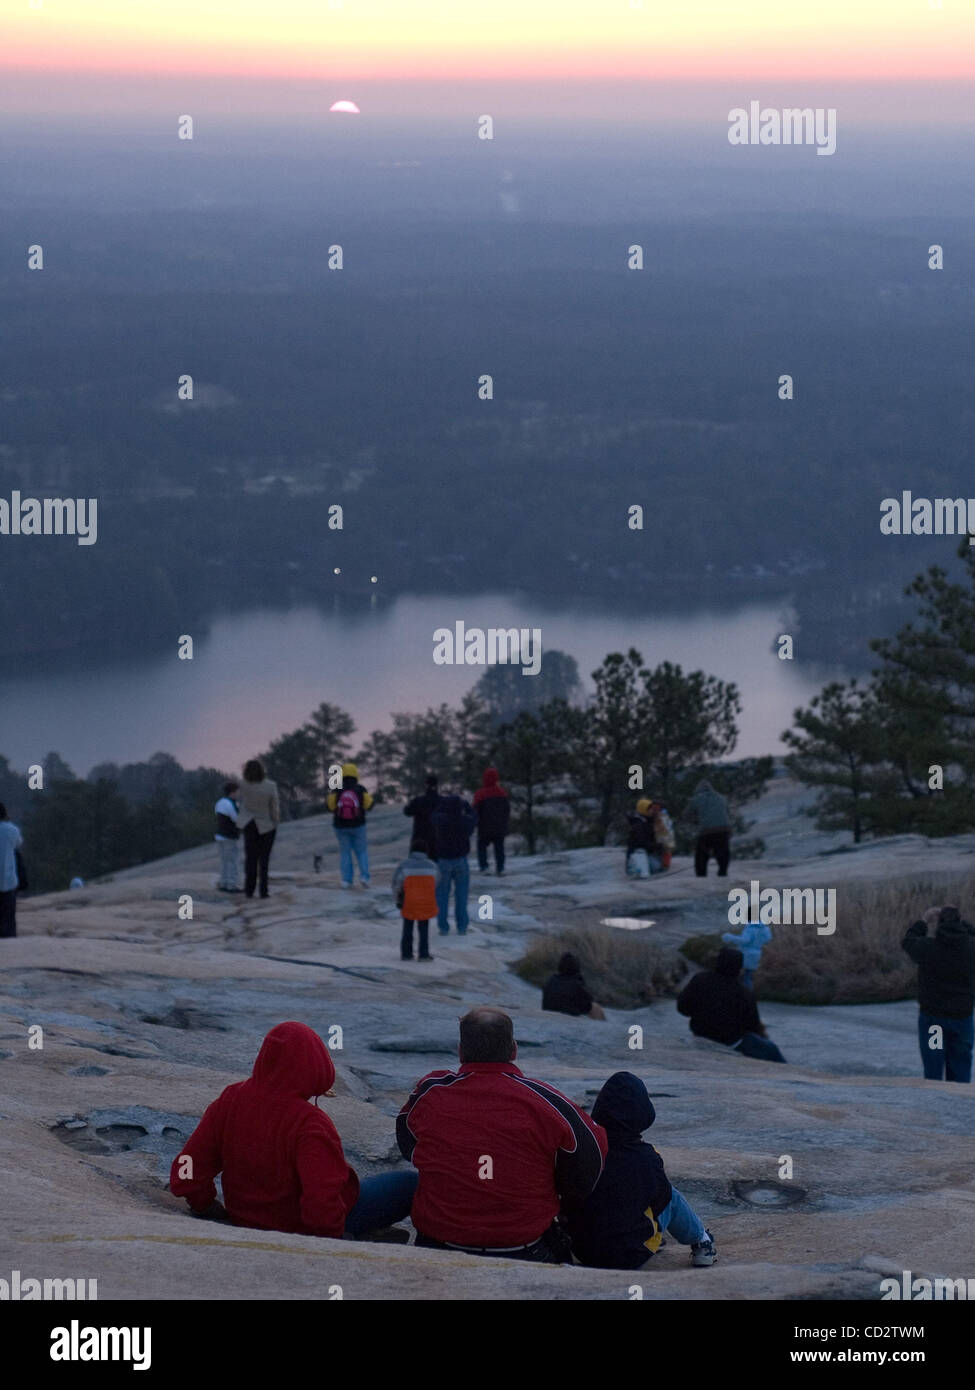 Worshipers watch as the sun rises during the Easter Sunrise Service on the top of Stone Mountain, Ga. The world's largest piece of exposed granite, Stone Mountain rises 1,863-feet above sea level